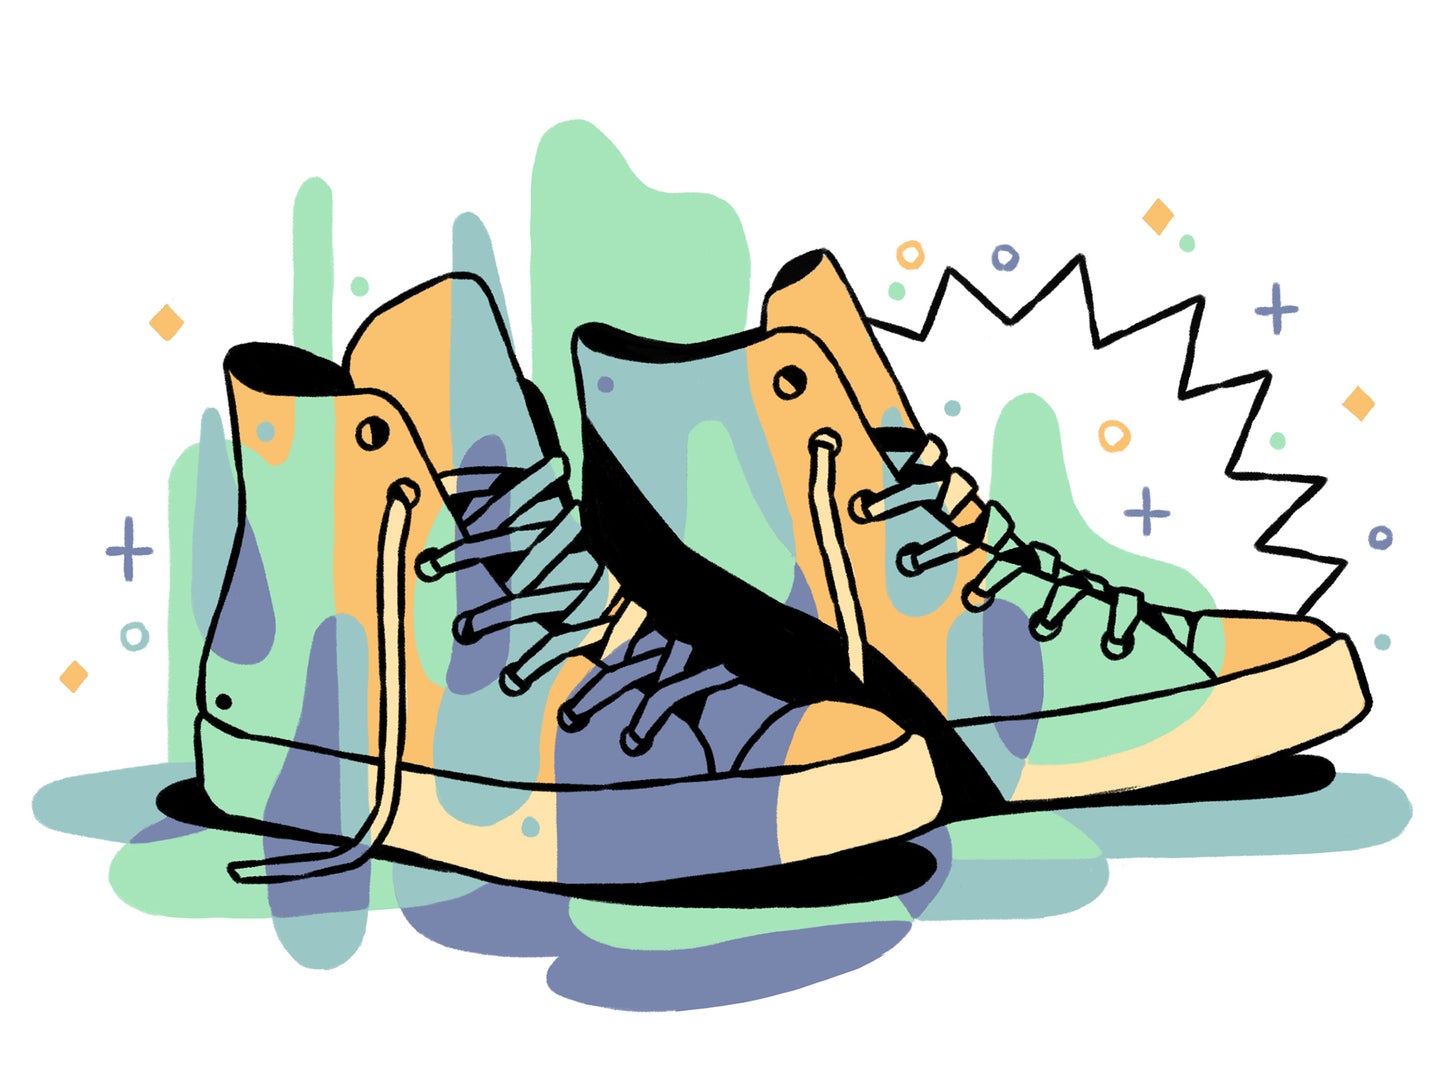 An illustration of sneakers stained with unremovable substance.